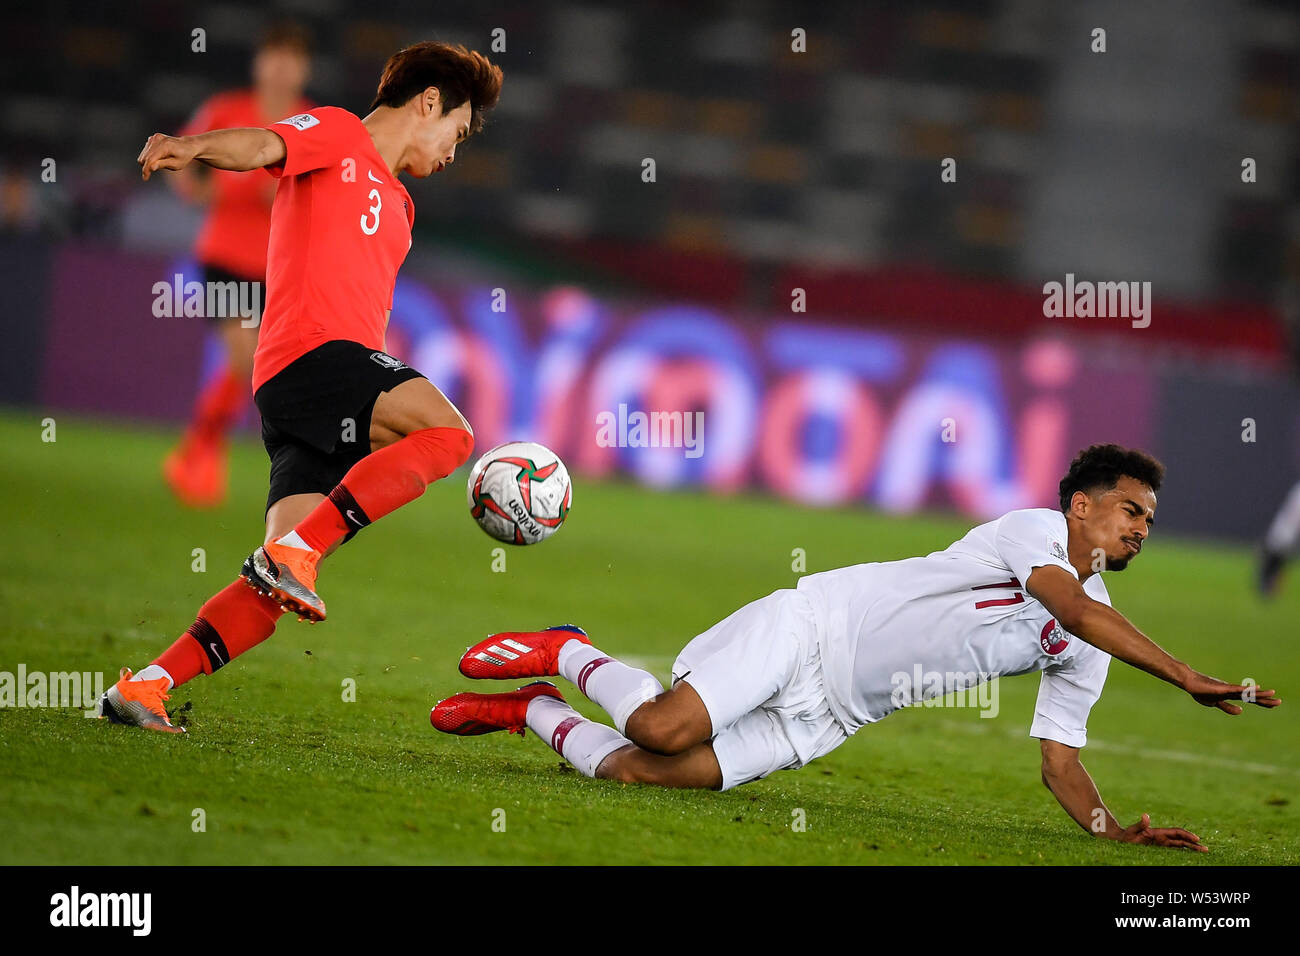 Kim Jin-su, left, of South Korea national football team passes the ball against a player of Qatar national football team in their quarter-final match Stock Photo